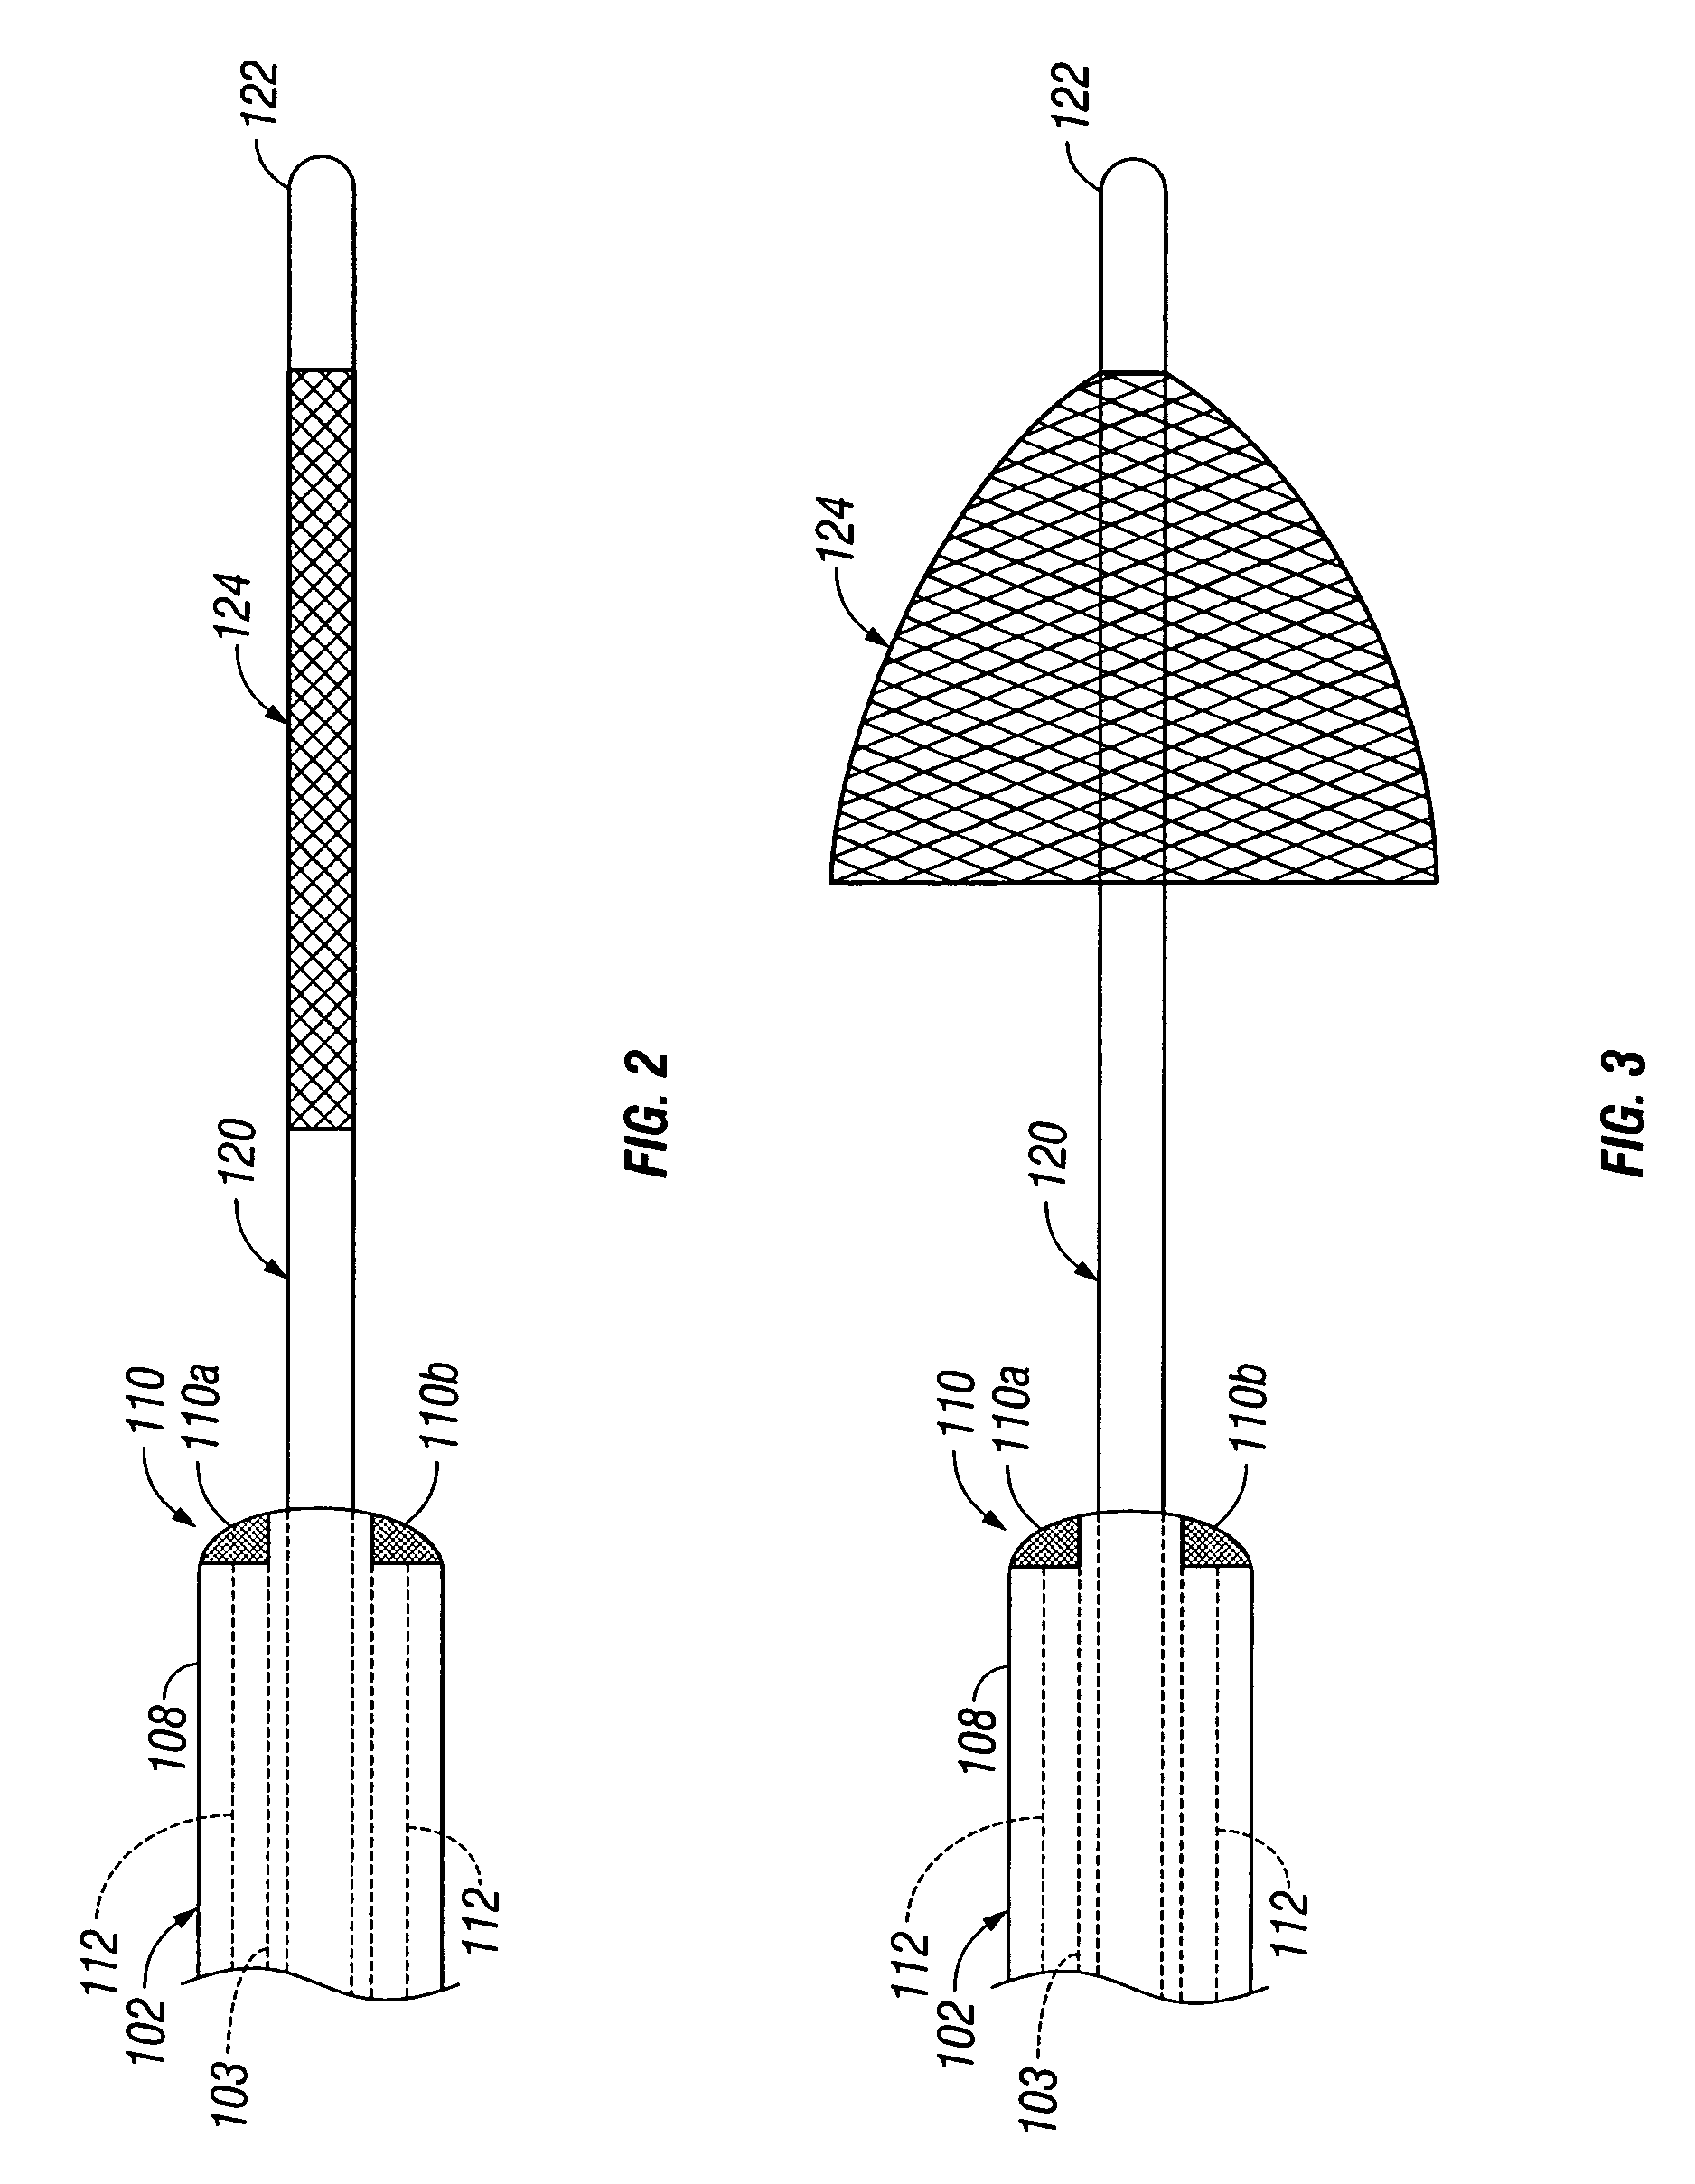 Percutaneous or surgical radiofrequency intravascular thrombectomy catheter system and method